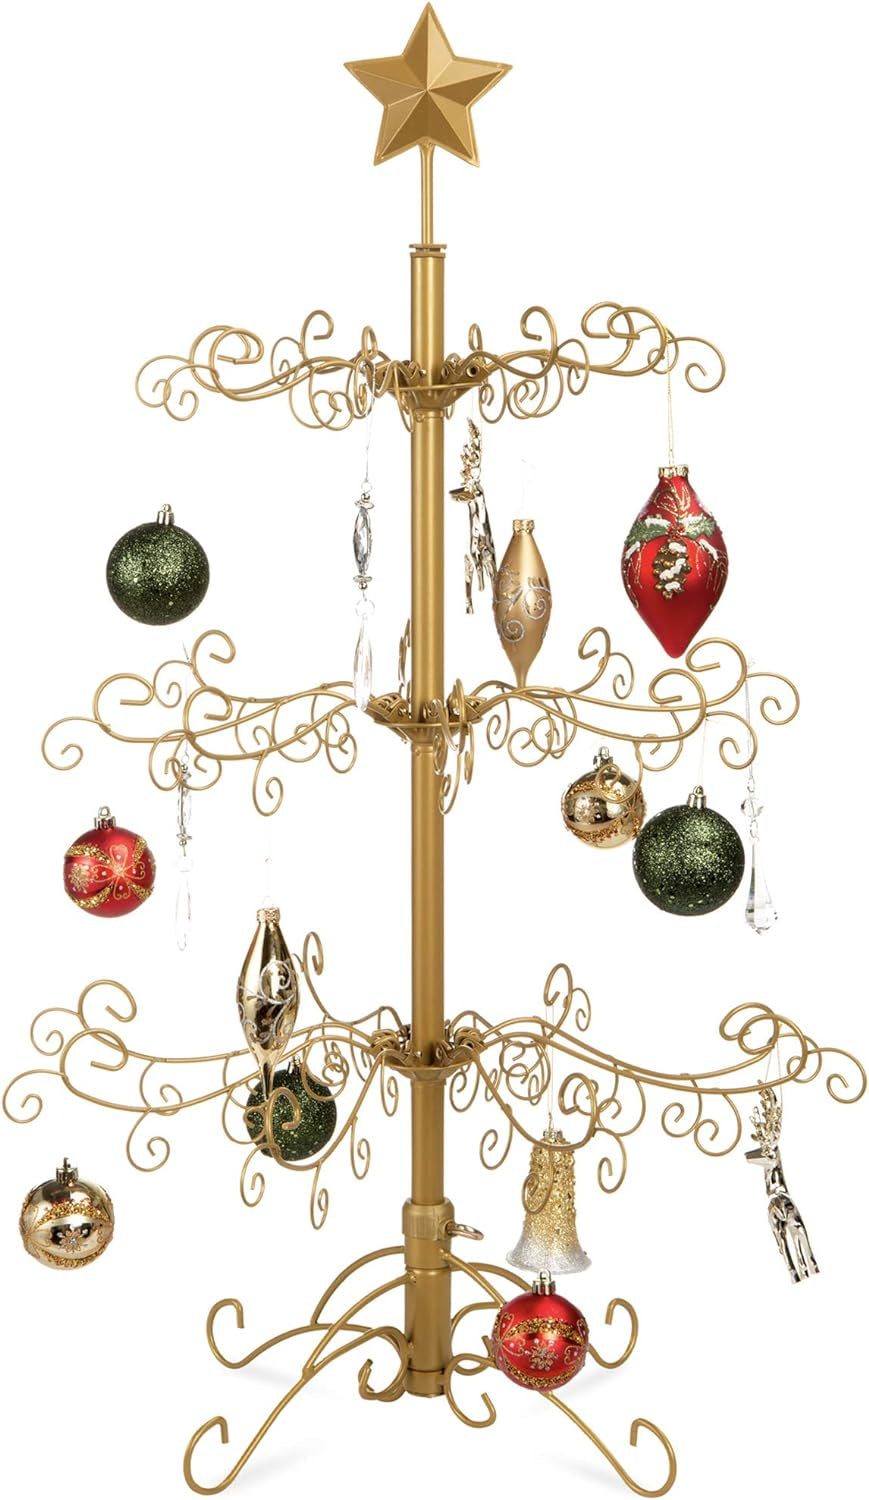 Best Choice Products 3Ft Wrought Iron Ornament Display Christmas Tree W/Easy Assembly and Stand - Gold